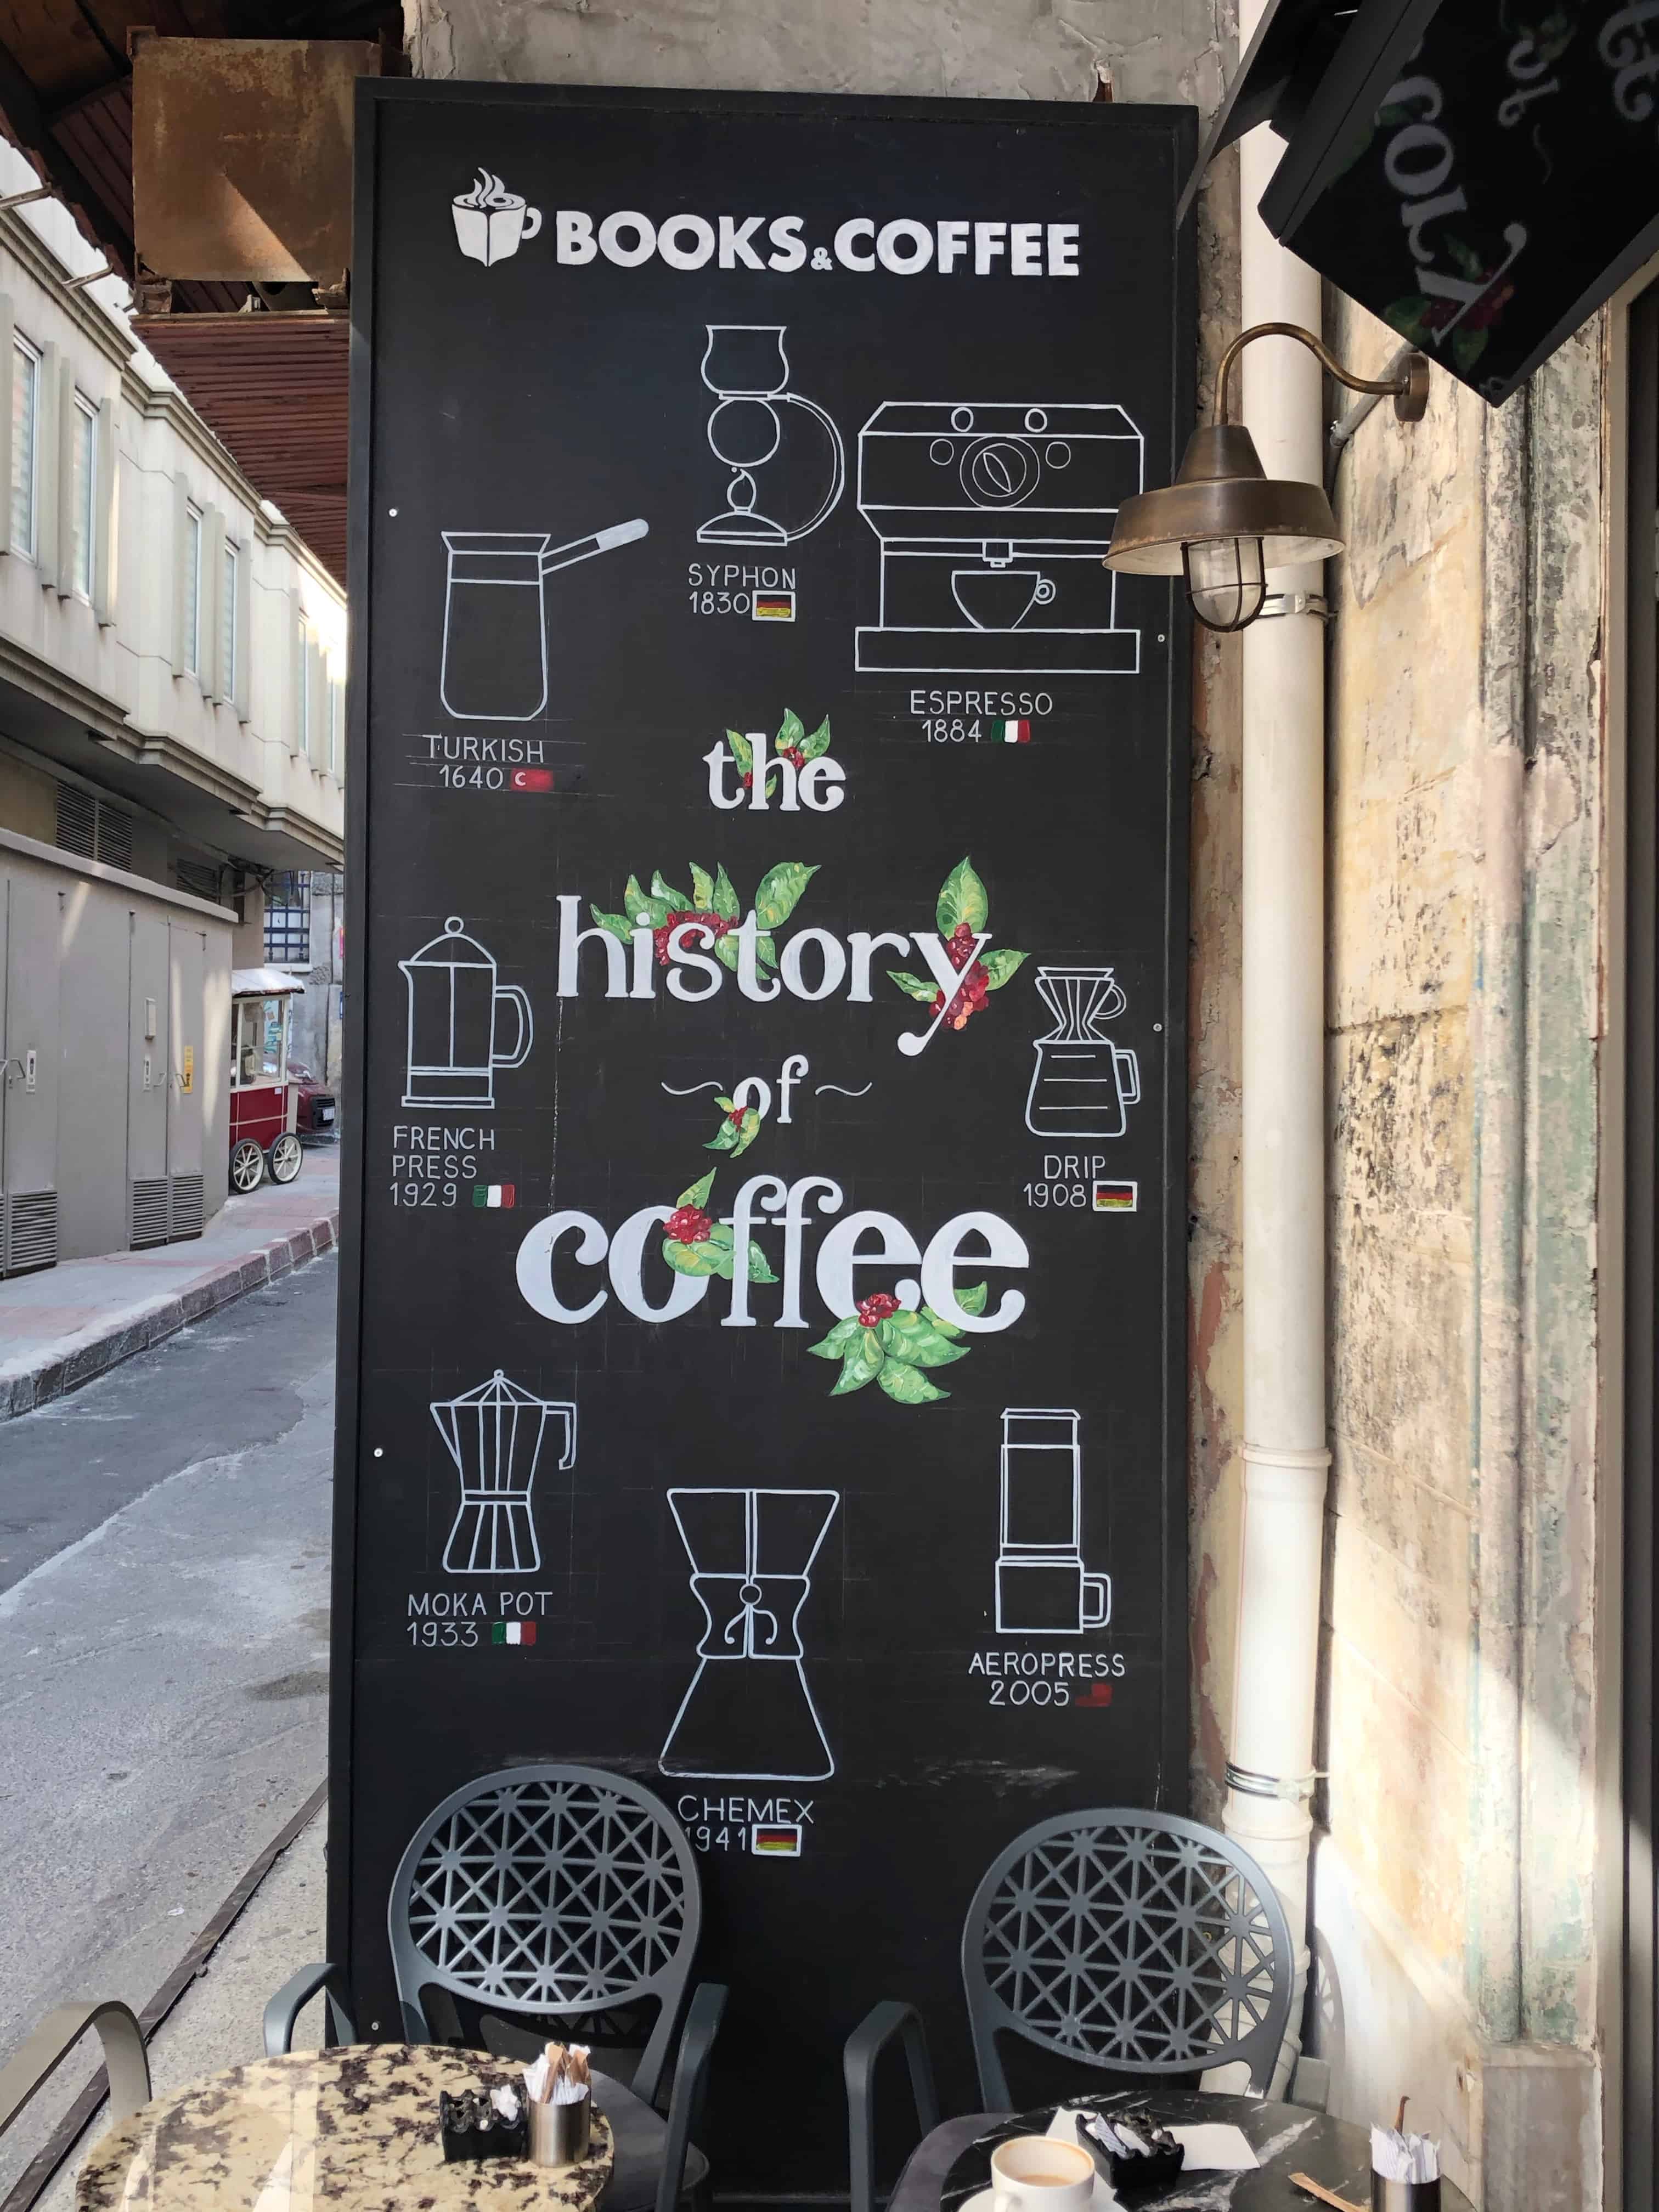 "History of Coffee" at Books & Coffee